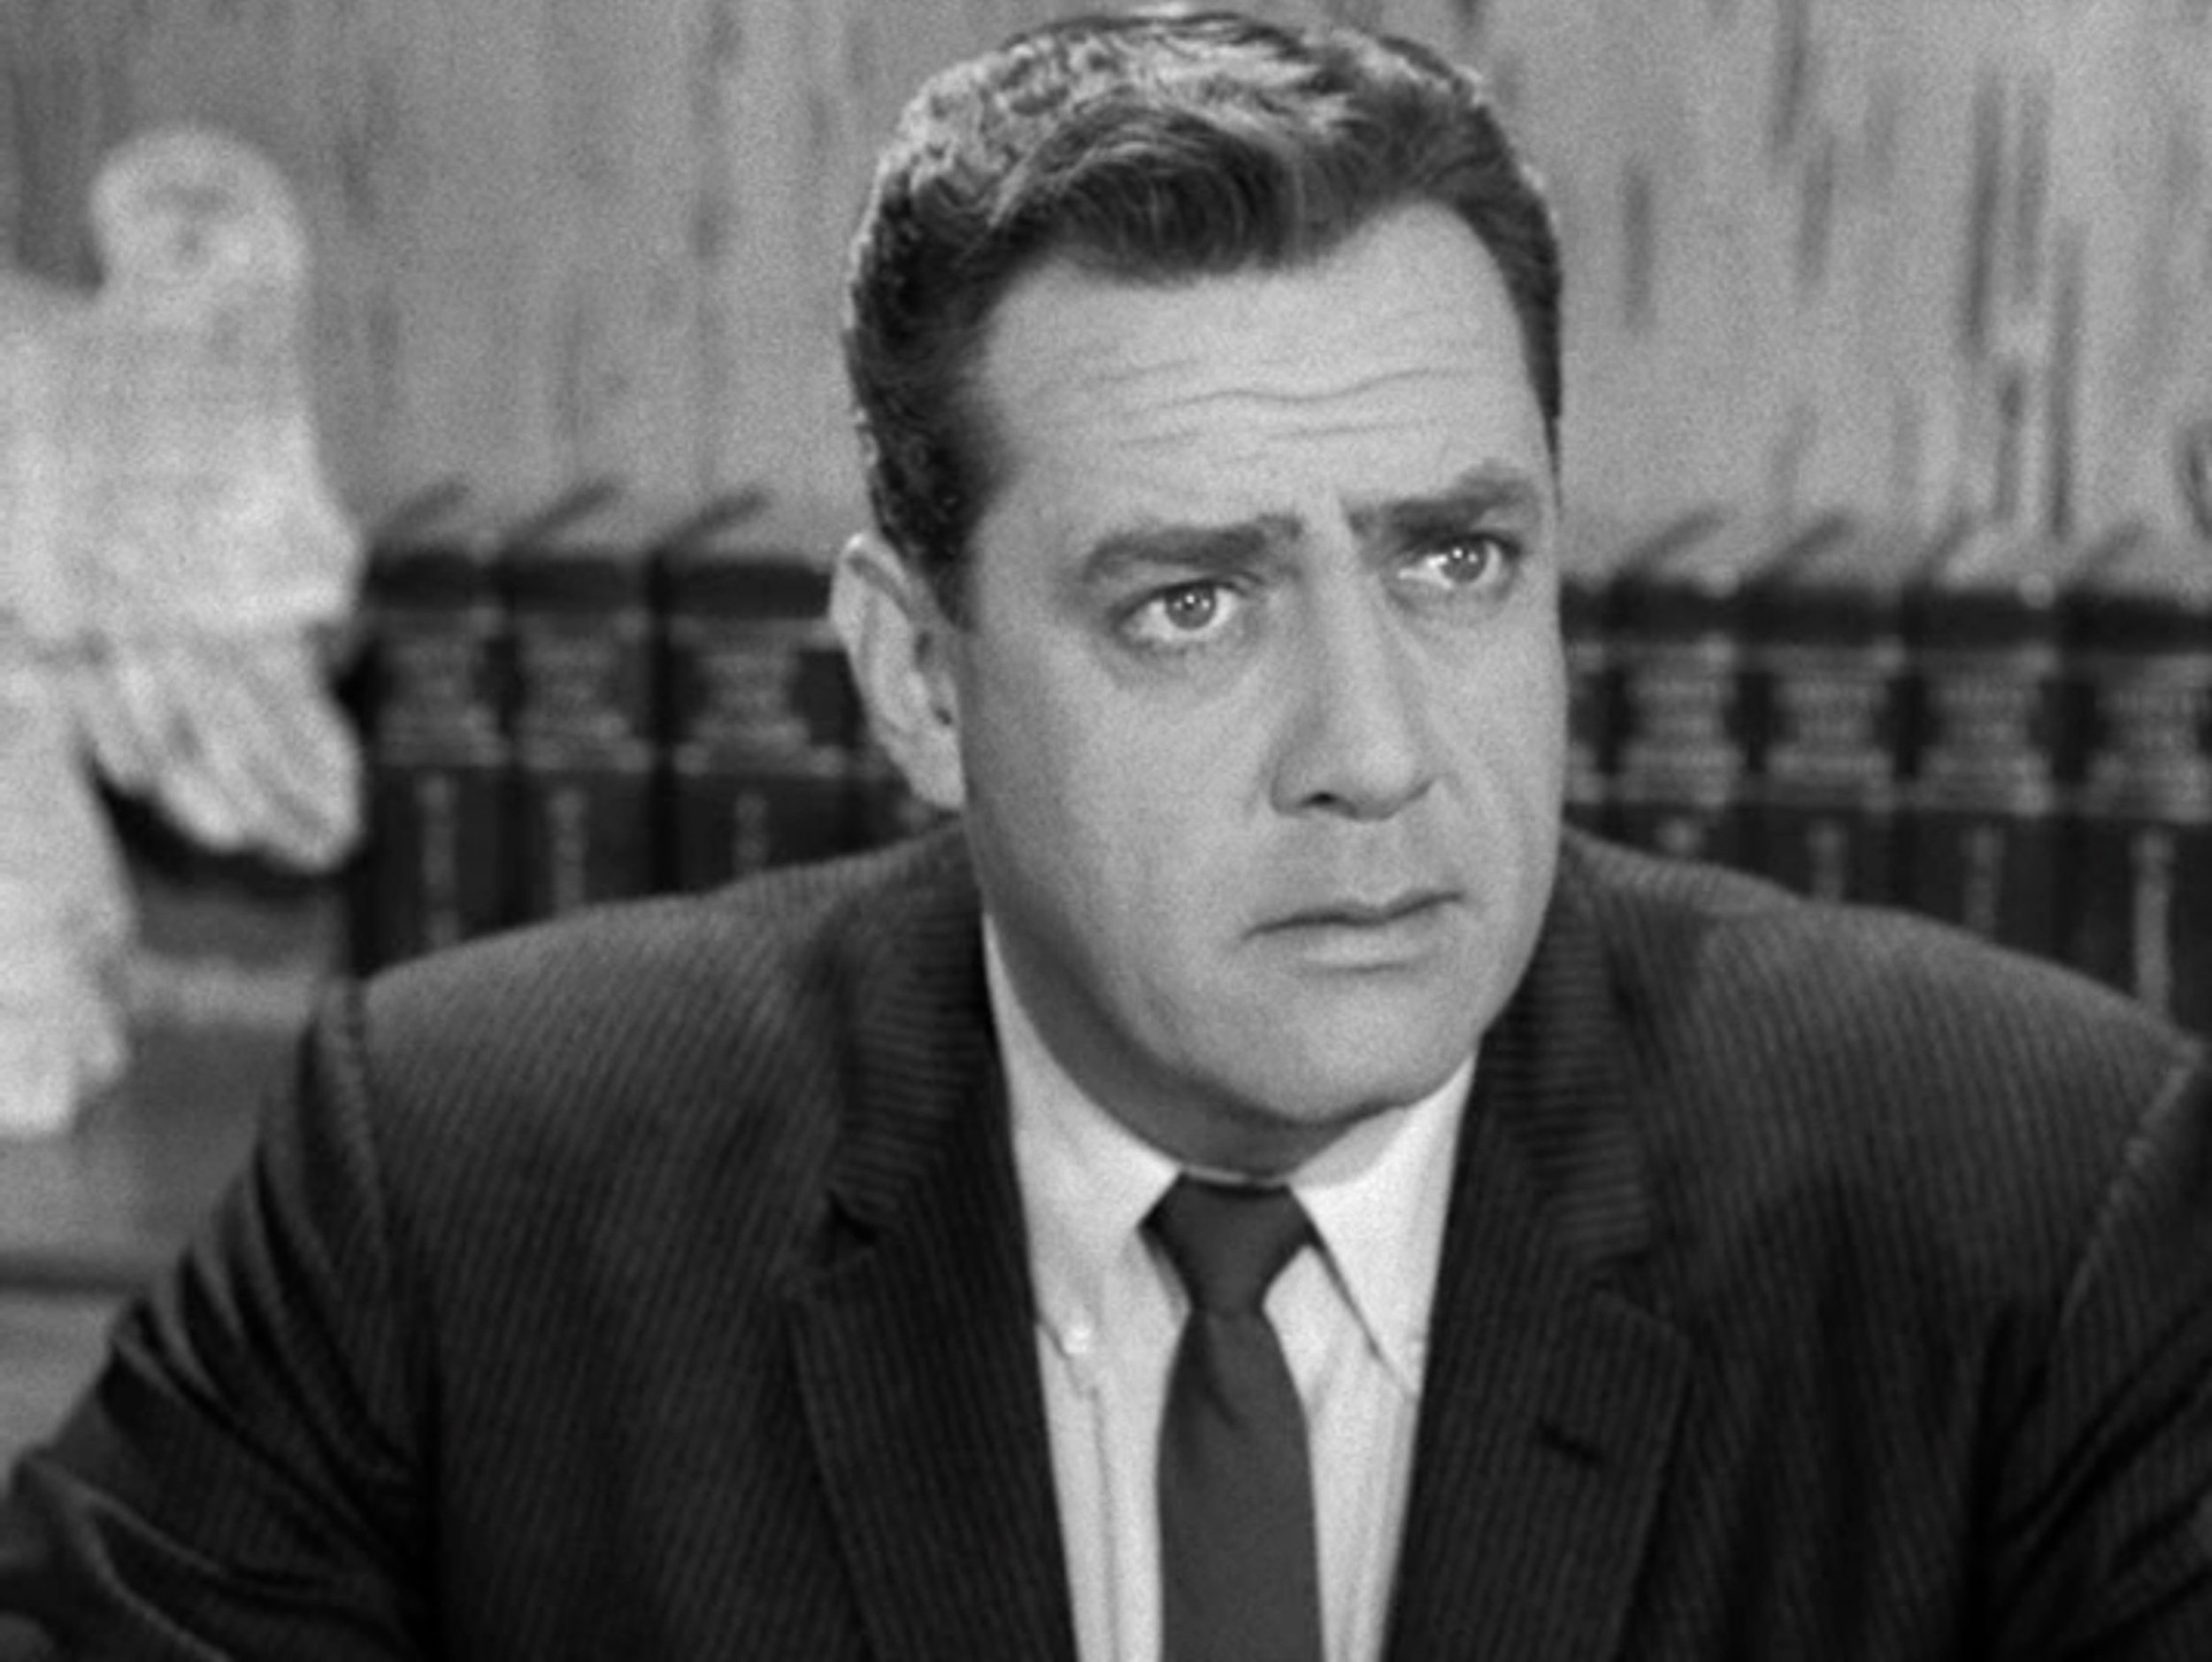 Raymond Burr starring as Perry Mason in the TV show "Perry Mason" on January 7, 1961 ┃Source: Getty Images